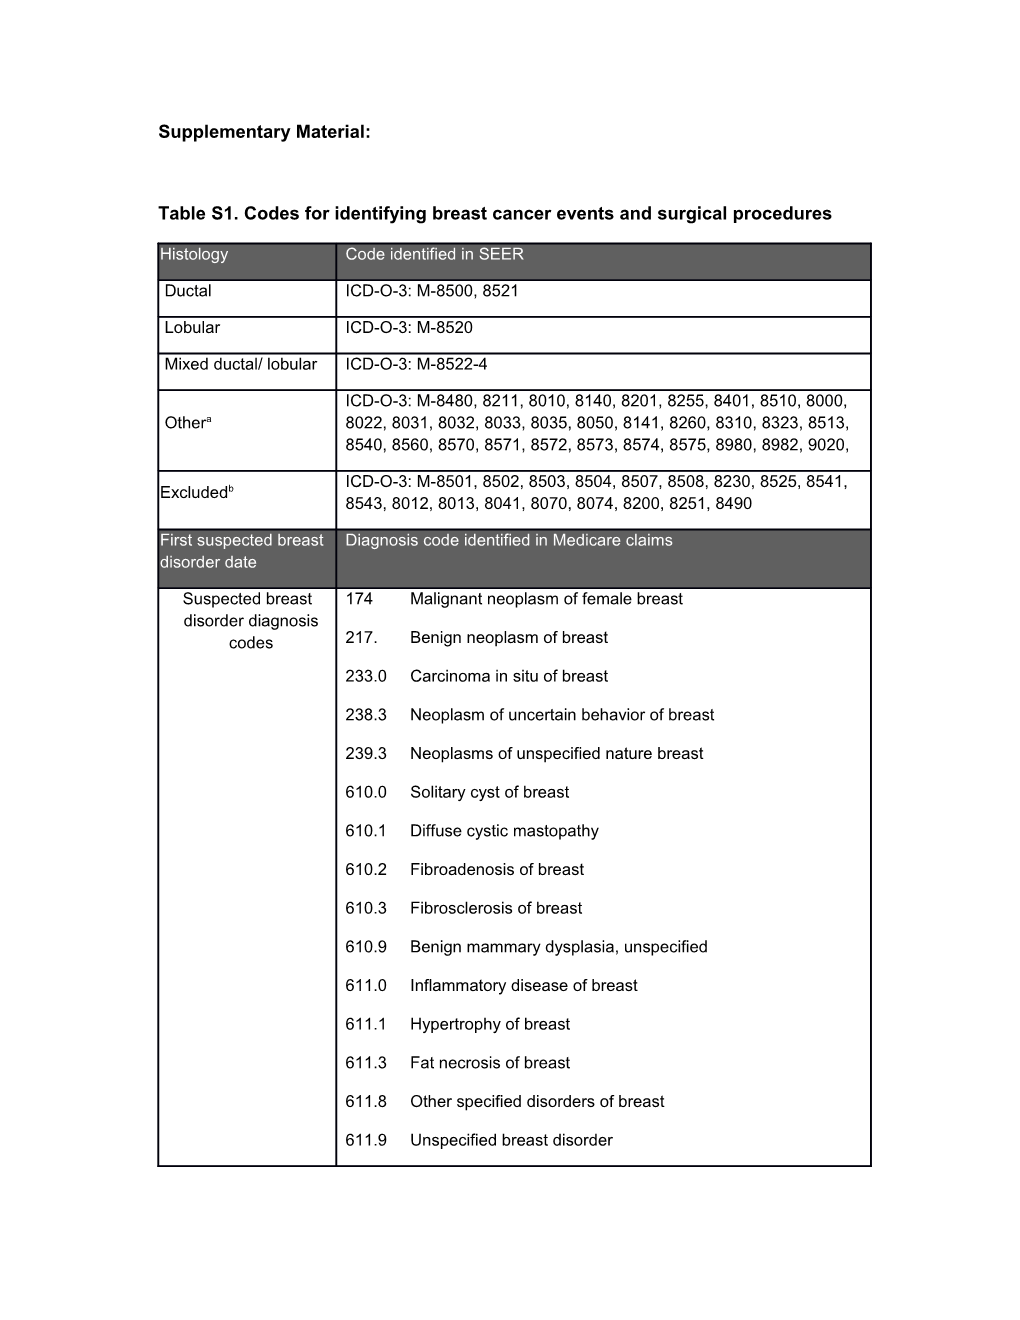 Table S1. Codes for Identifying Breast Cancer Events and Surgical Procedures